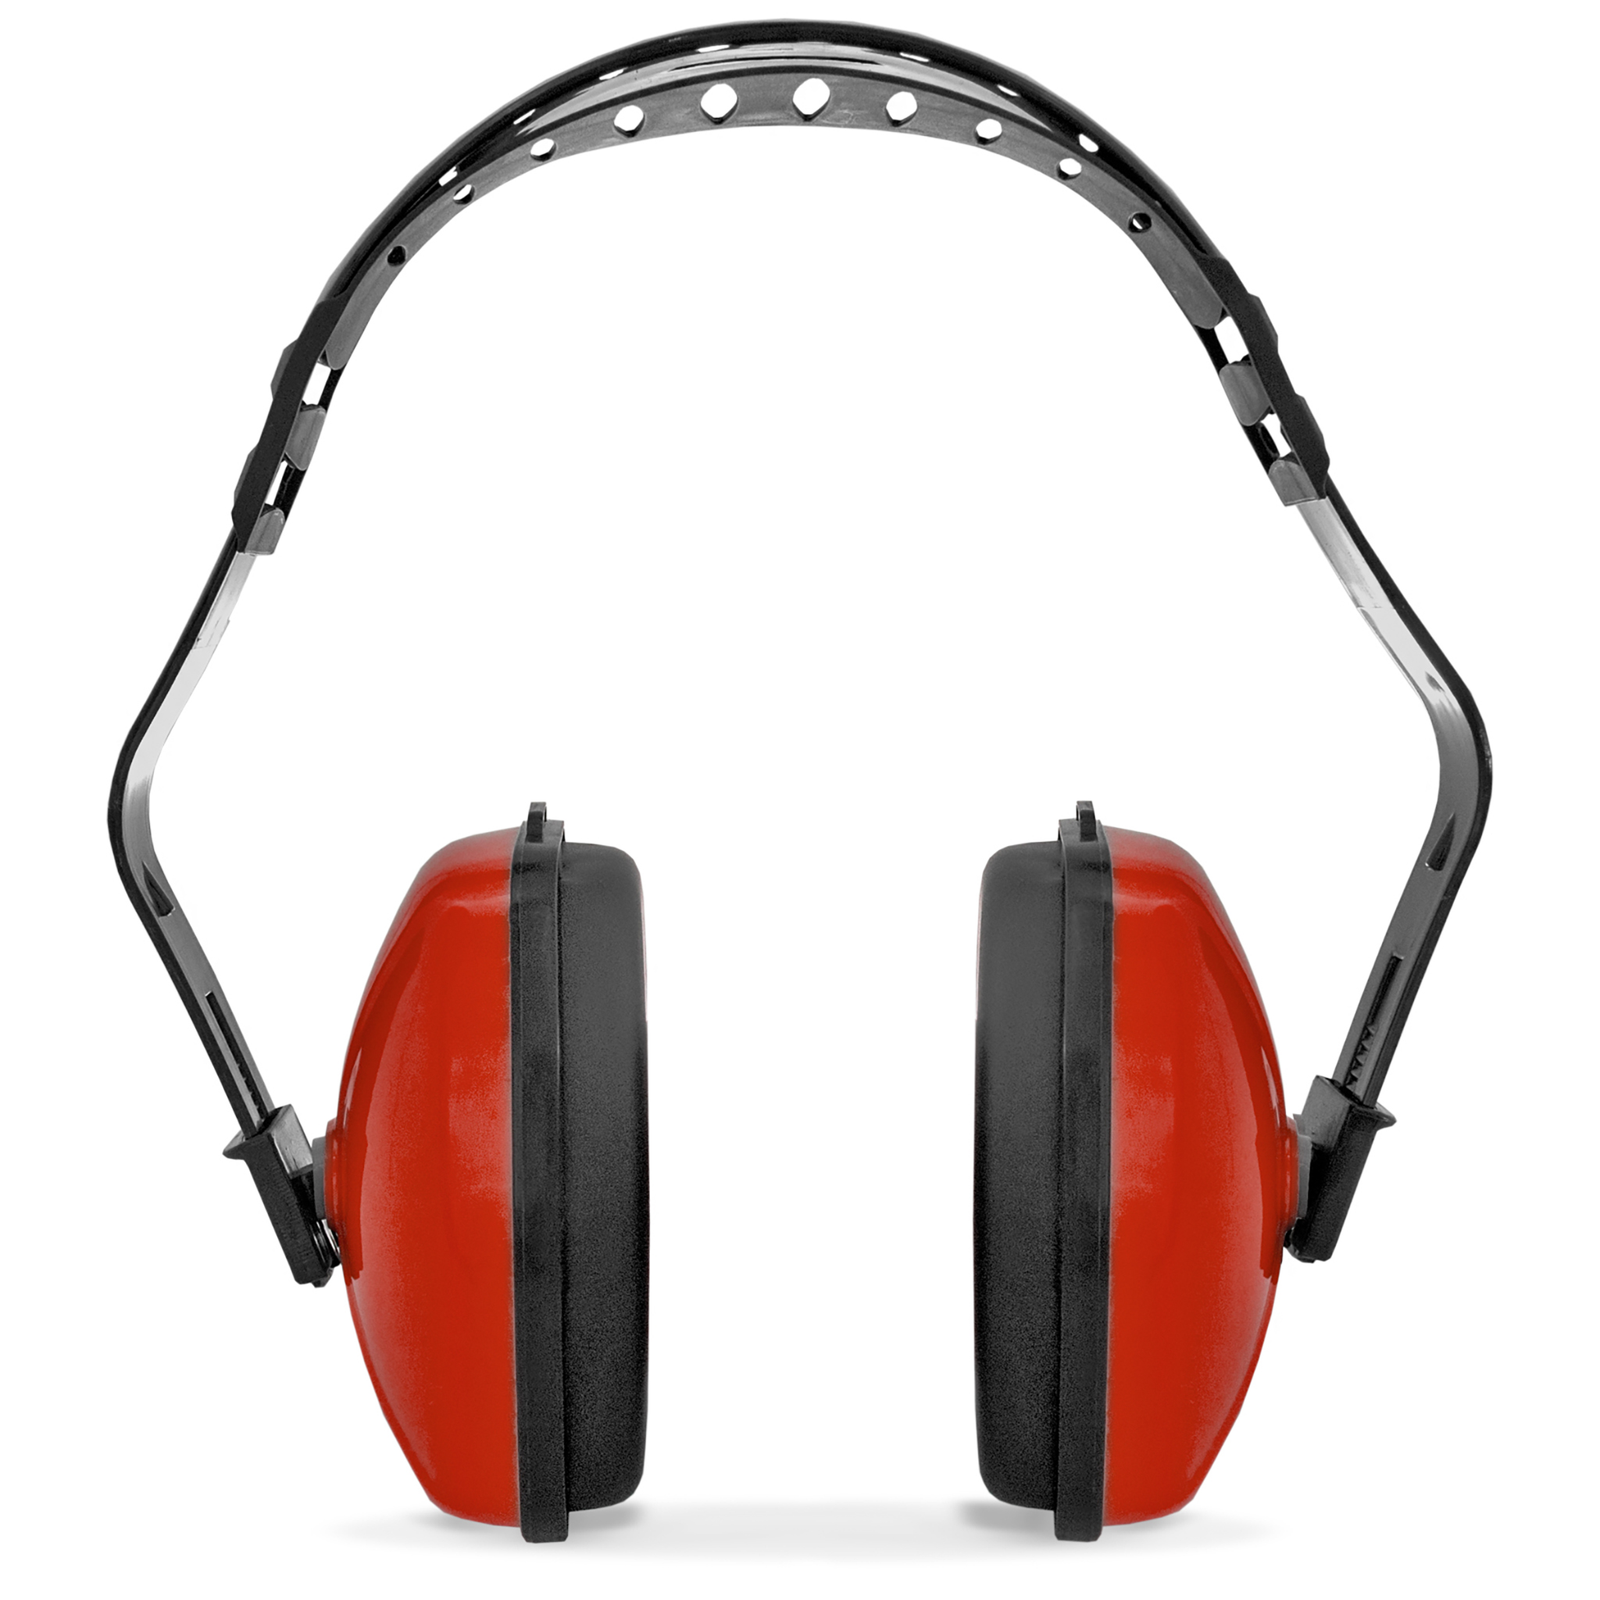 Front view of the red and black 23 NRR noise reduction JORESTECH ear muff for hearing protection